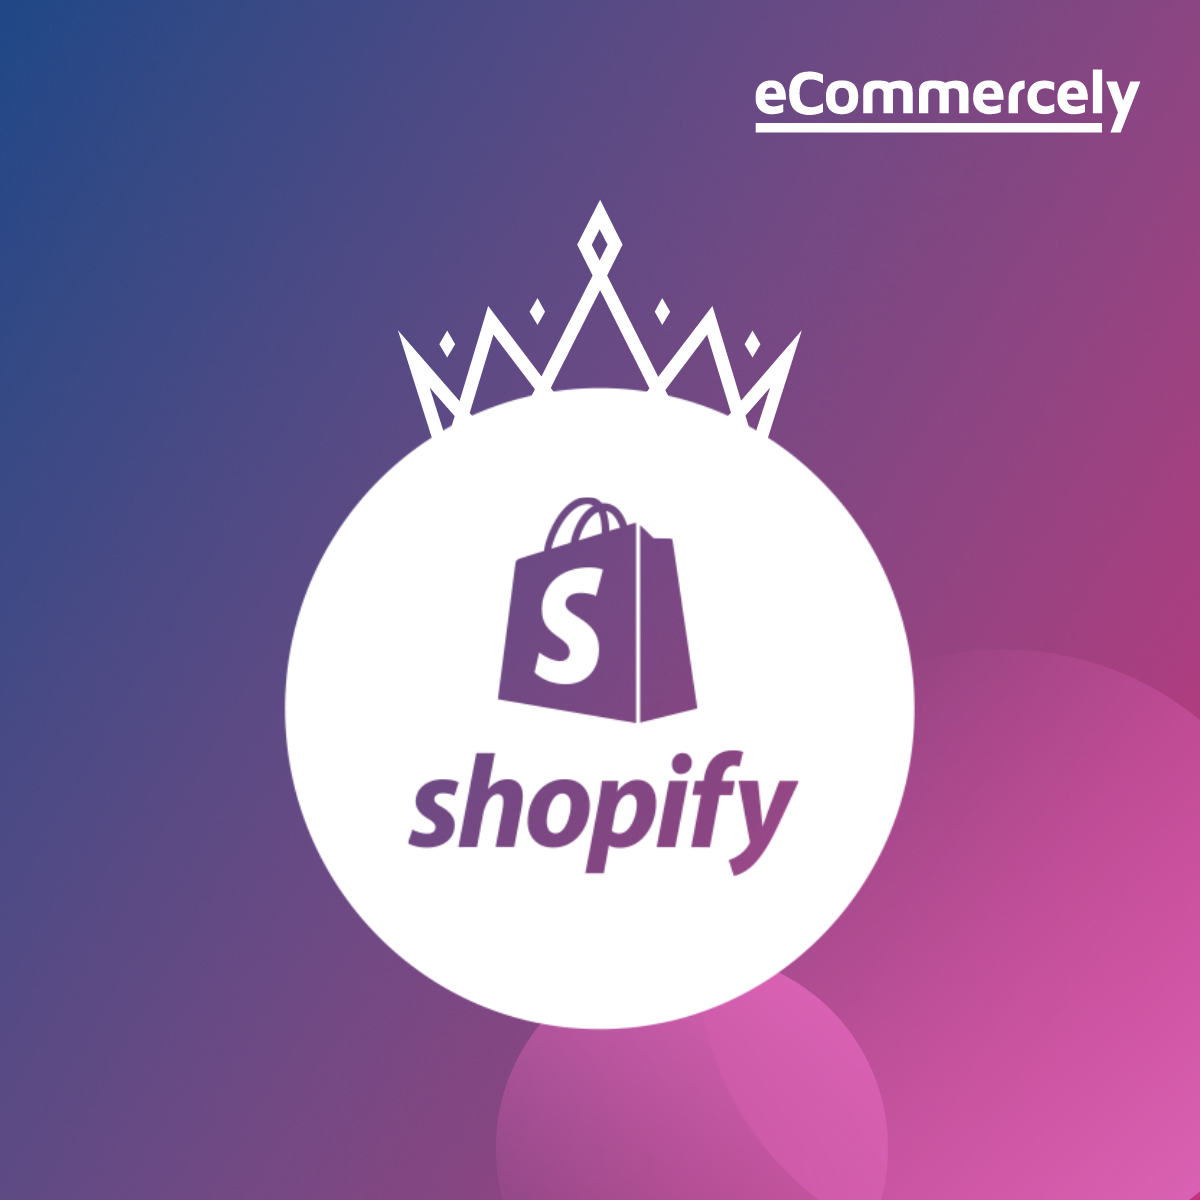 eCommercely Shopify Professional Service